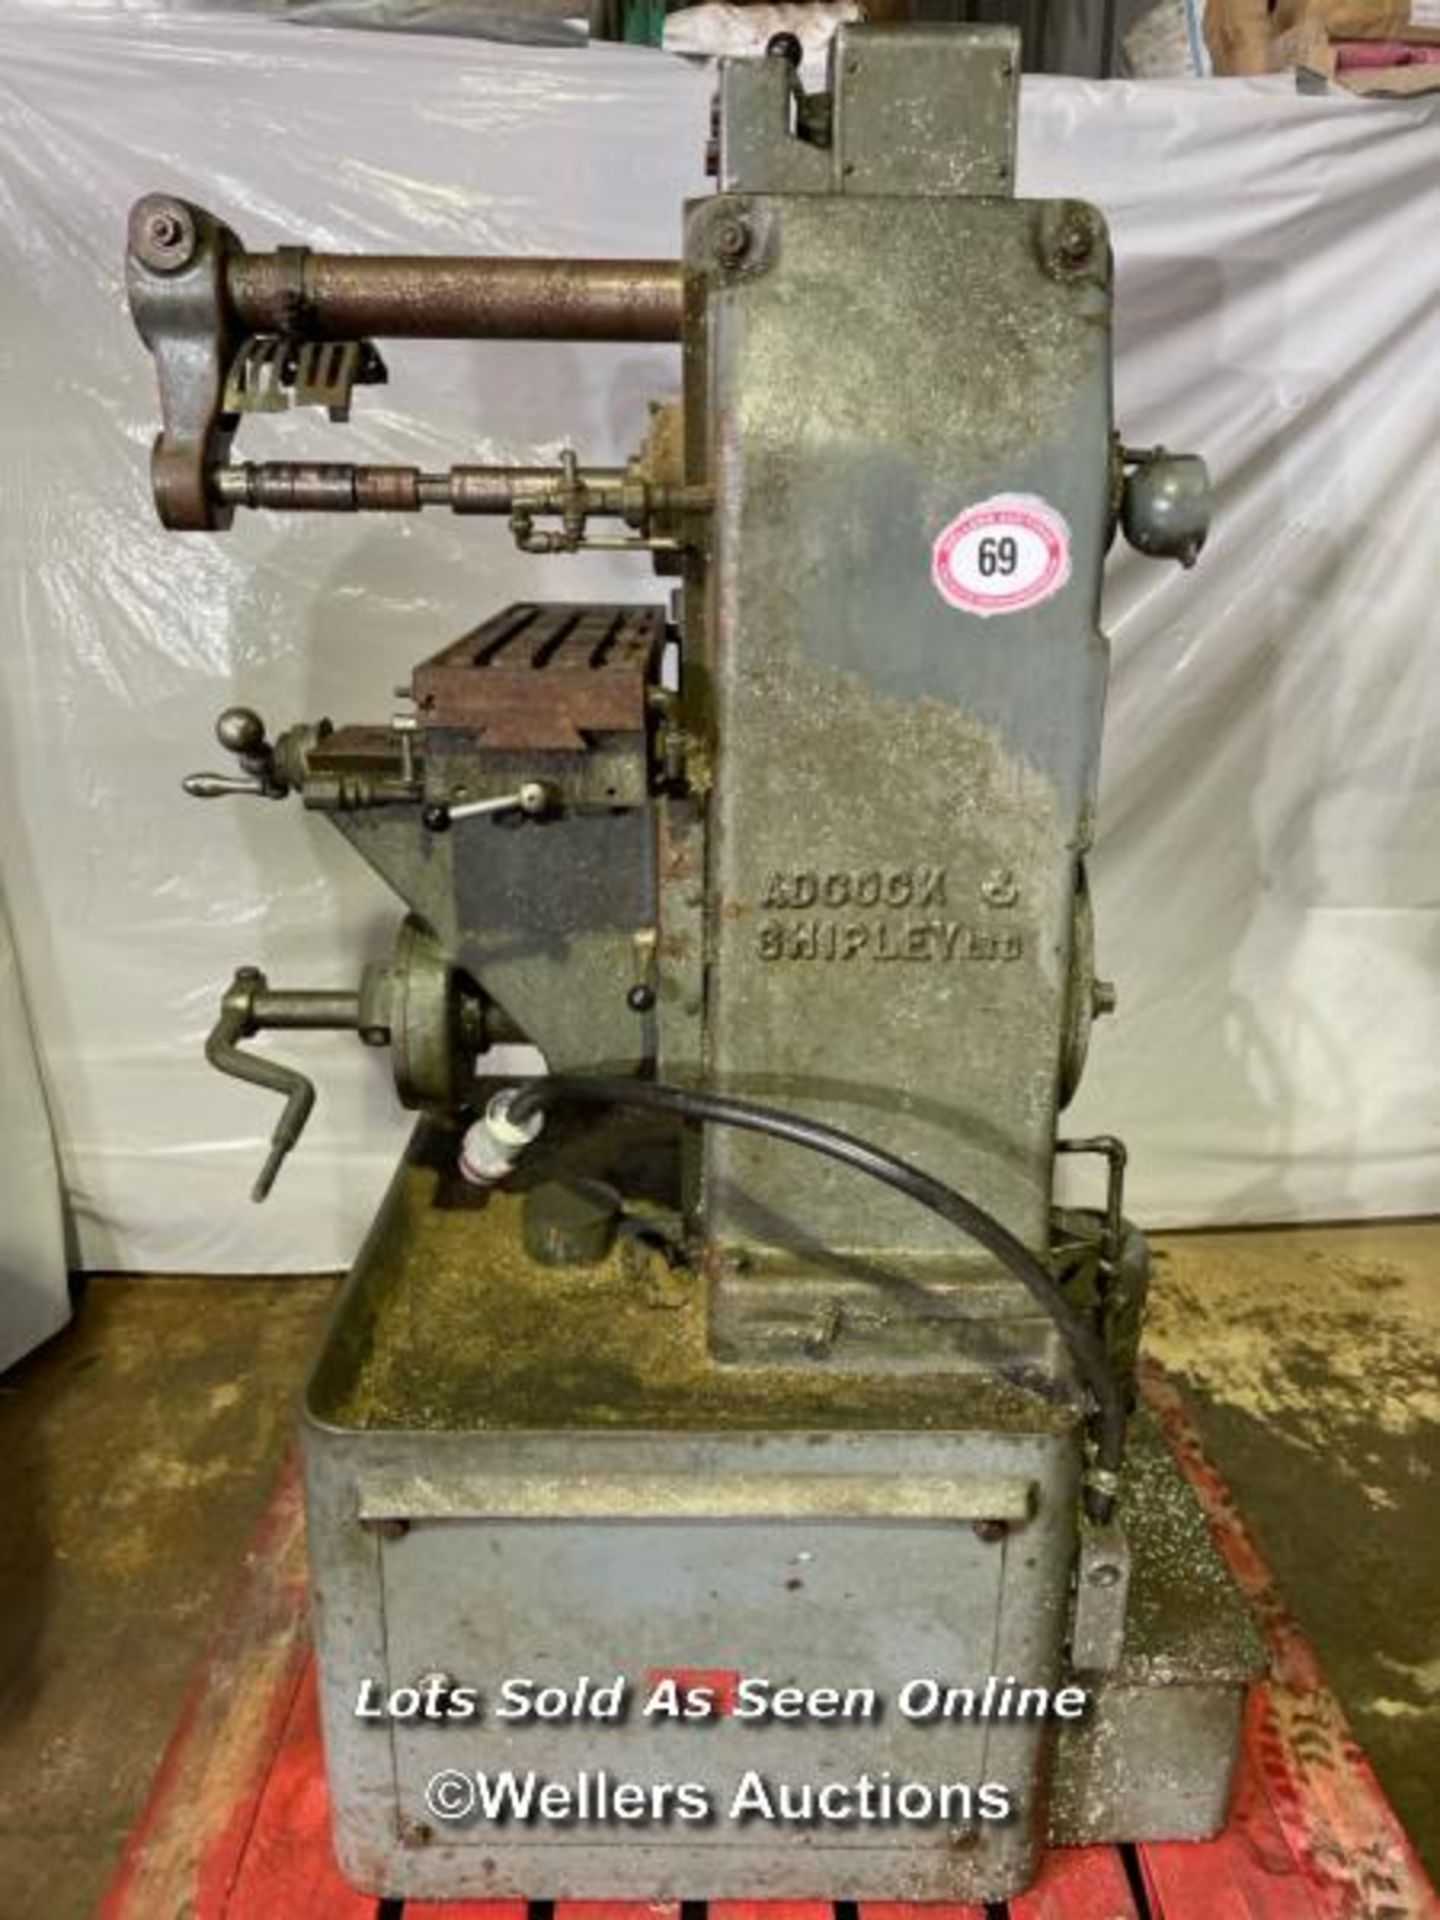 ADCOCK AND SHIPLEY LTD. LEVER ACTION HORIZONTAL MILL, 3 PHASE, IN WORKING ORDER